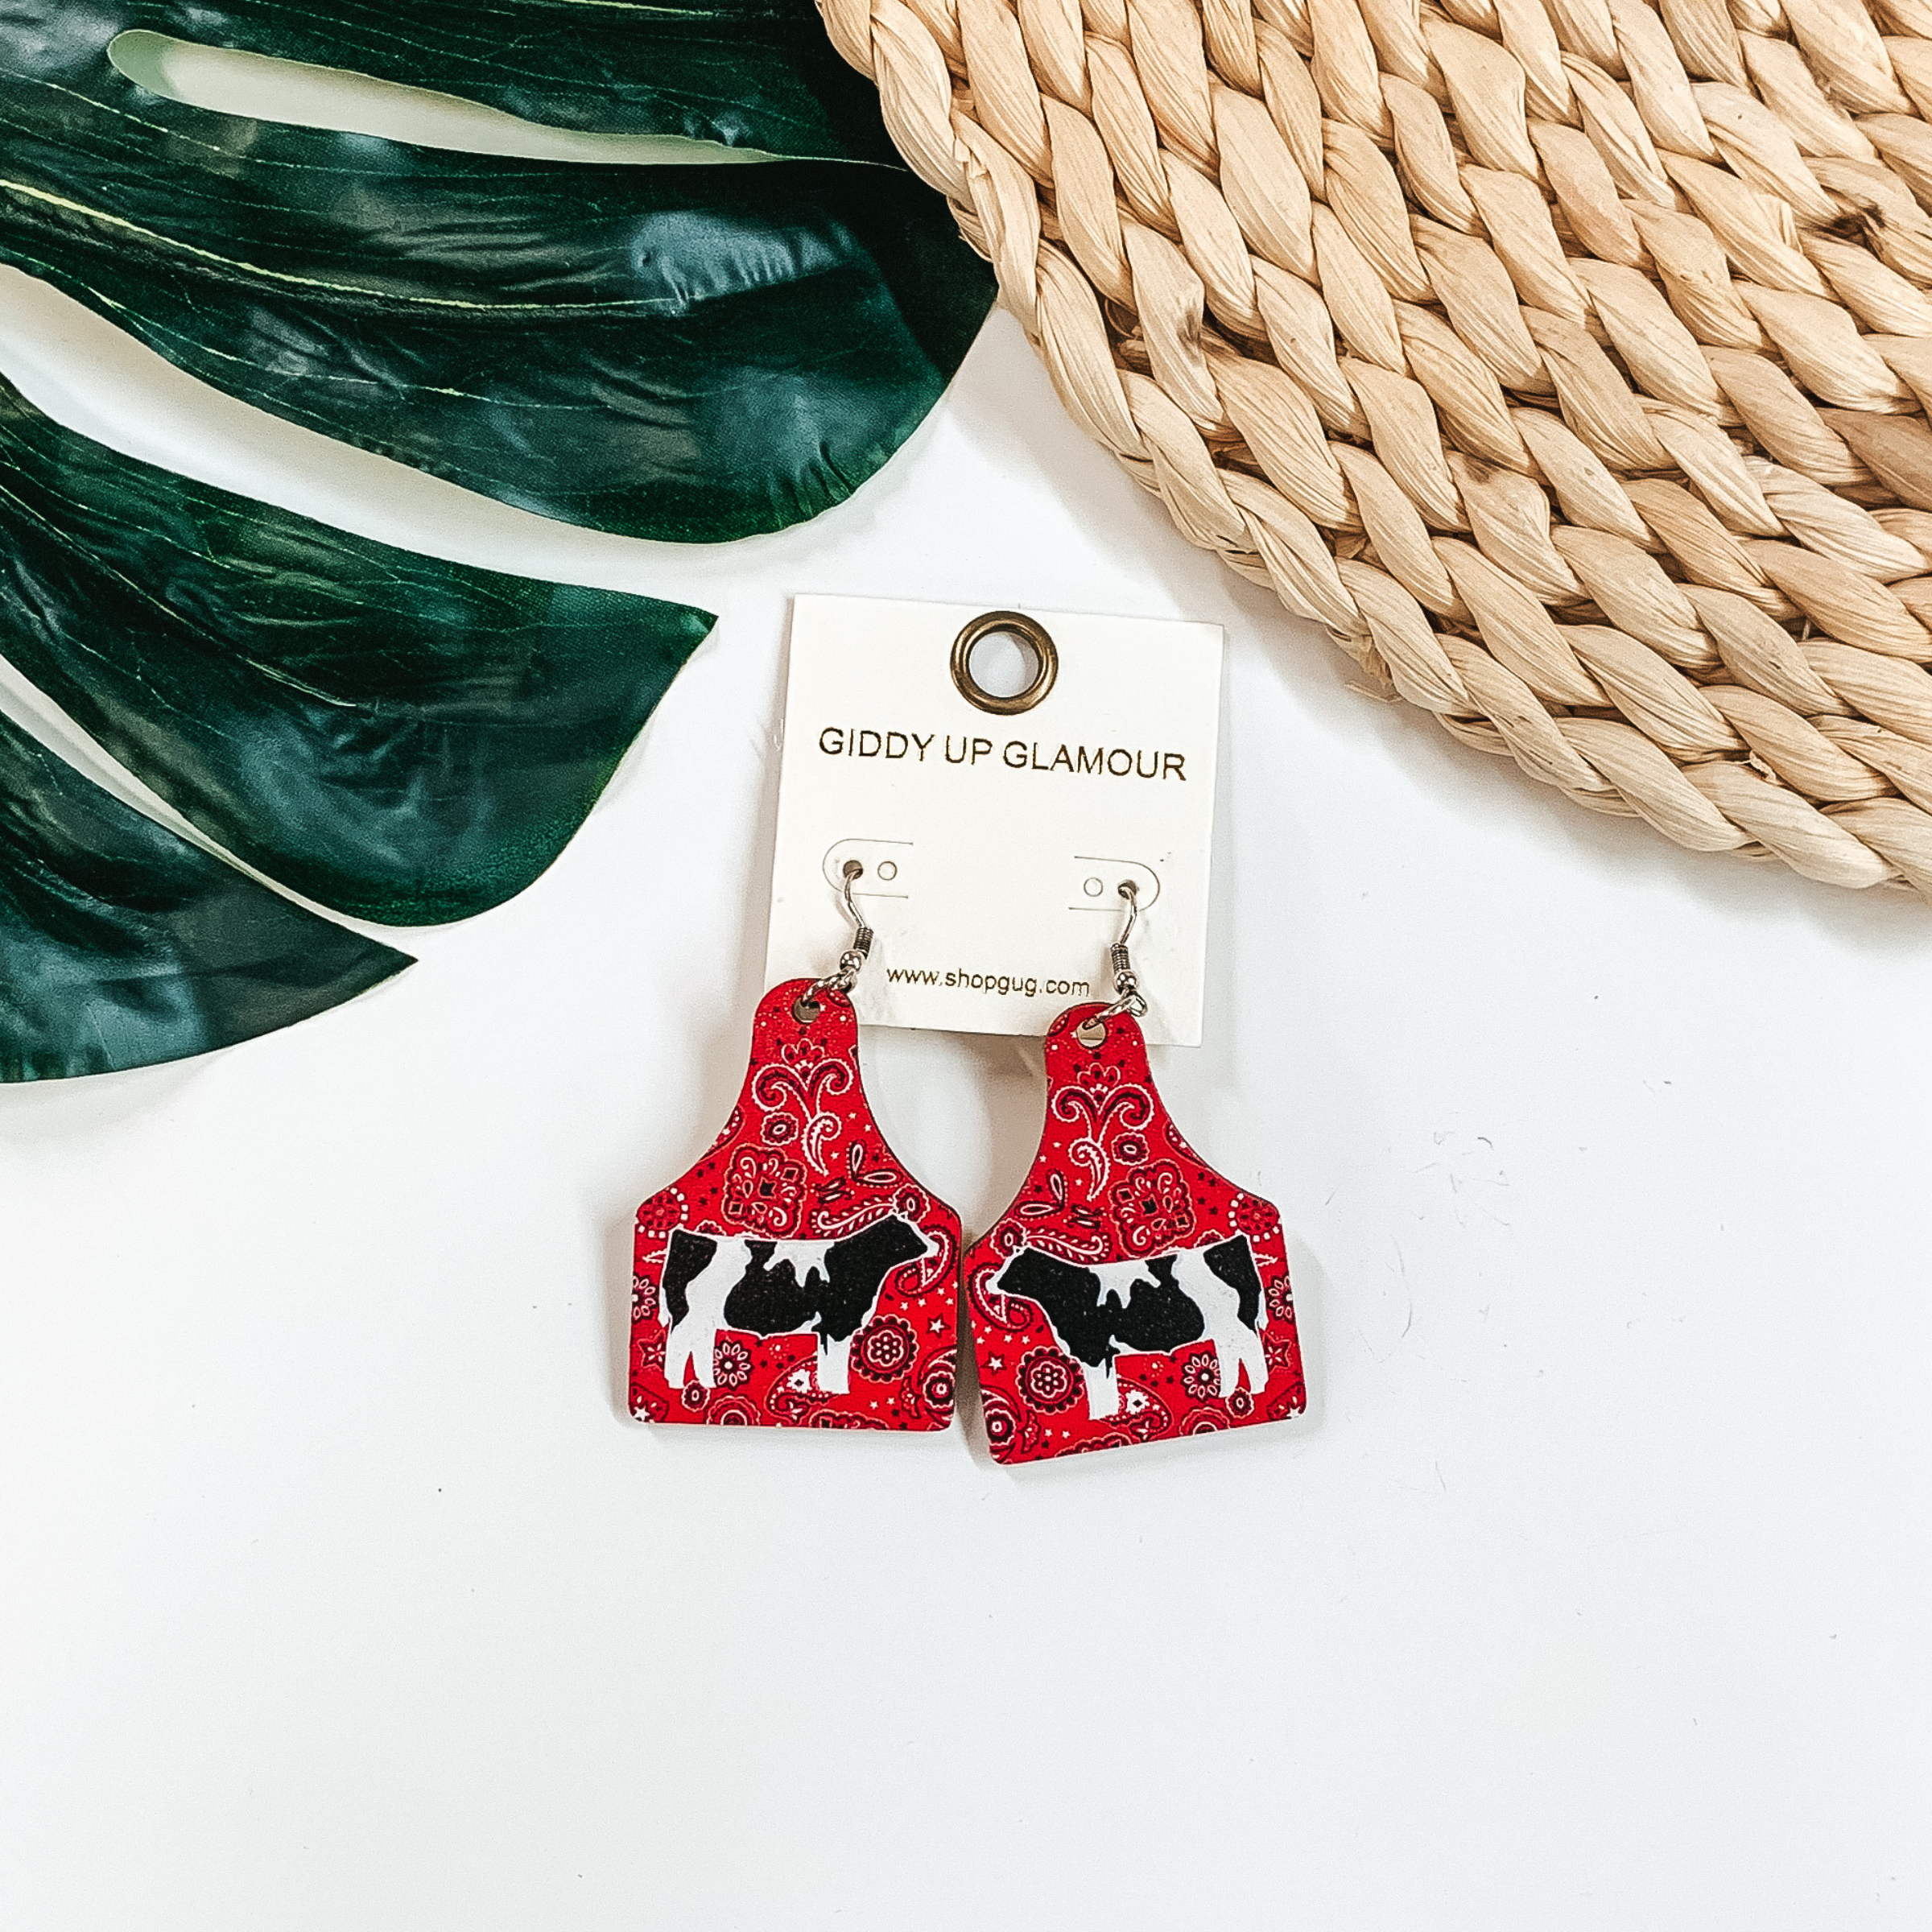 Cattle tag drop earrings in a red paisley print. In the center of these earrings there is a picture of a black and whtie cow. These earrings are pictured on a white background with a green leaf. 